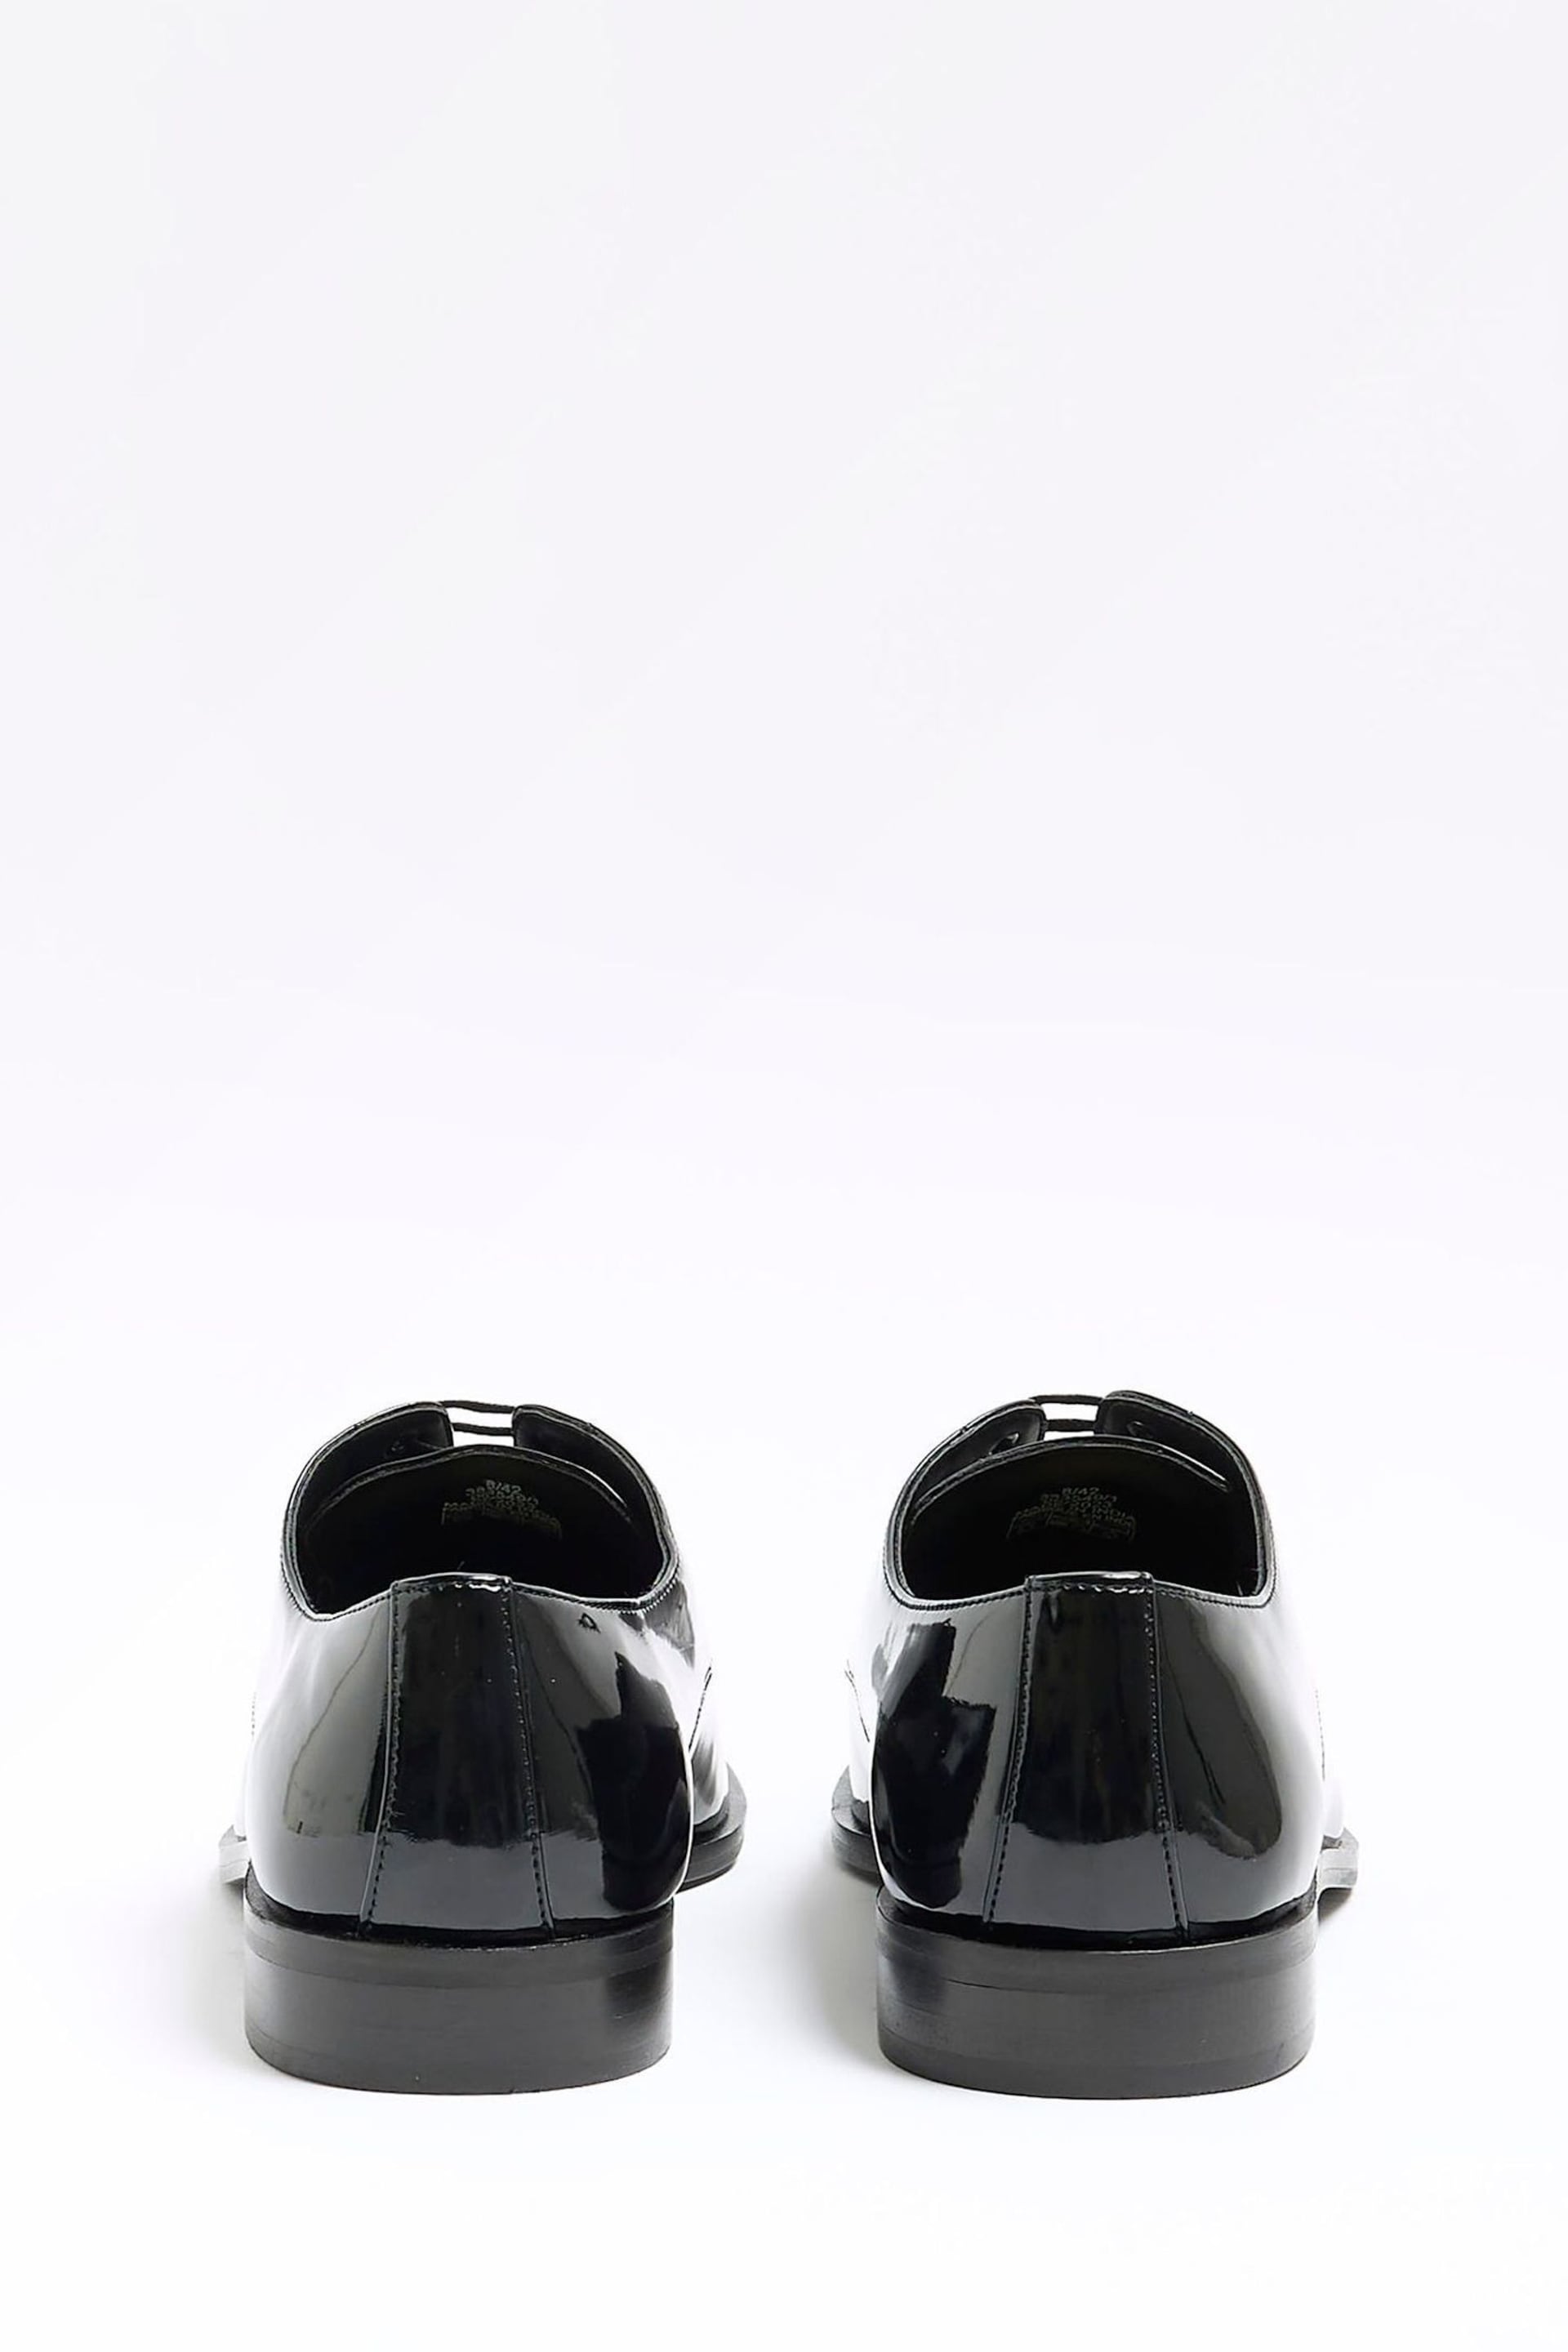 River Island Black Patent Derby Shoes - Image 3 of 4